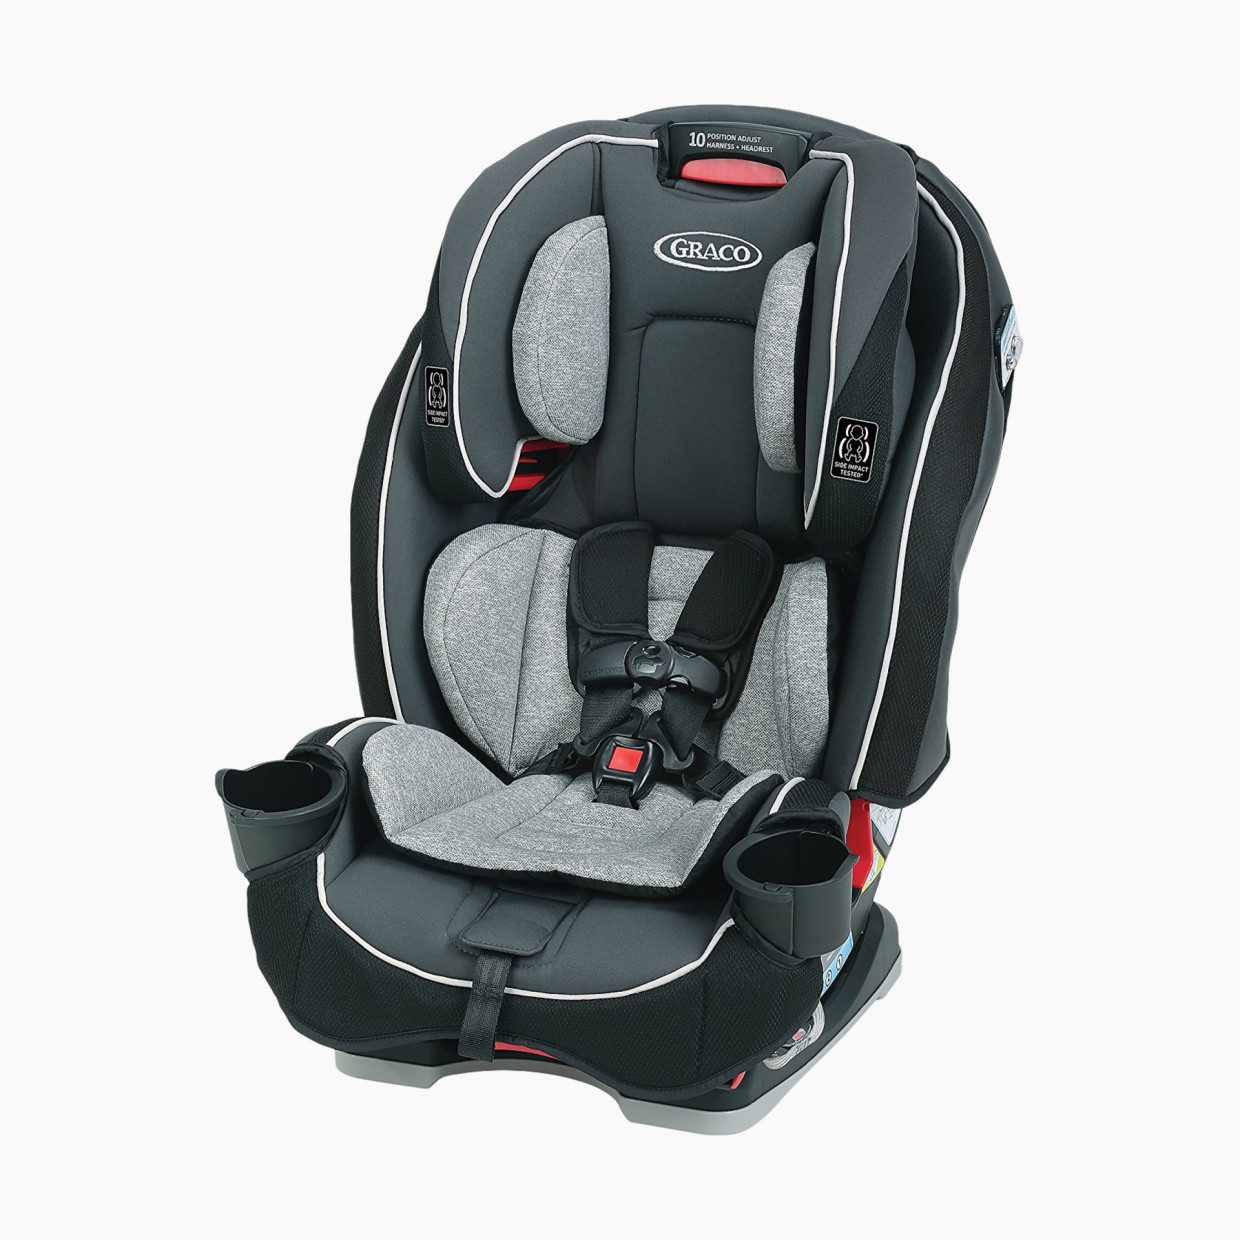 Graco SlimFit All-in-One Convertible Car Seat - Darcie.